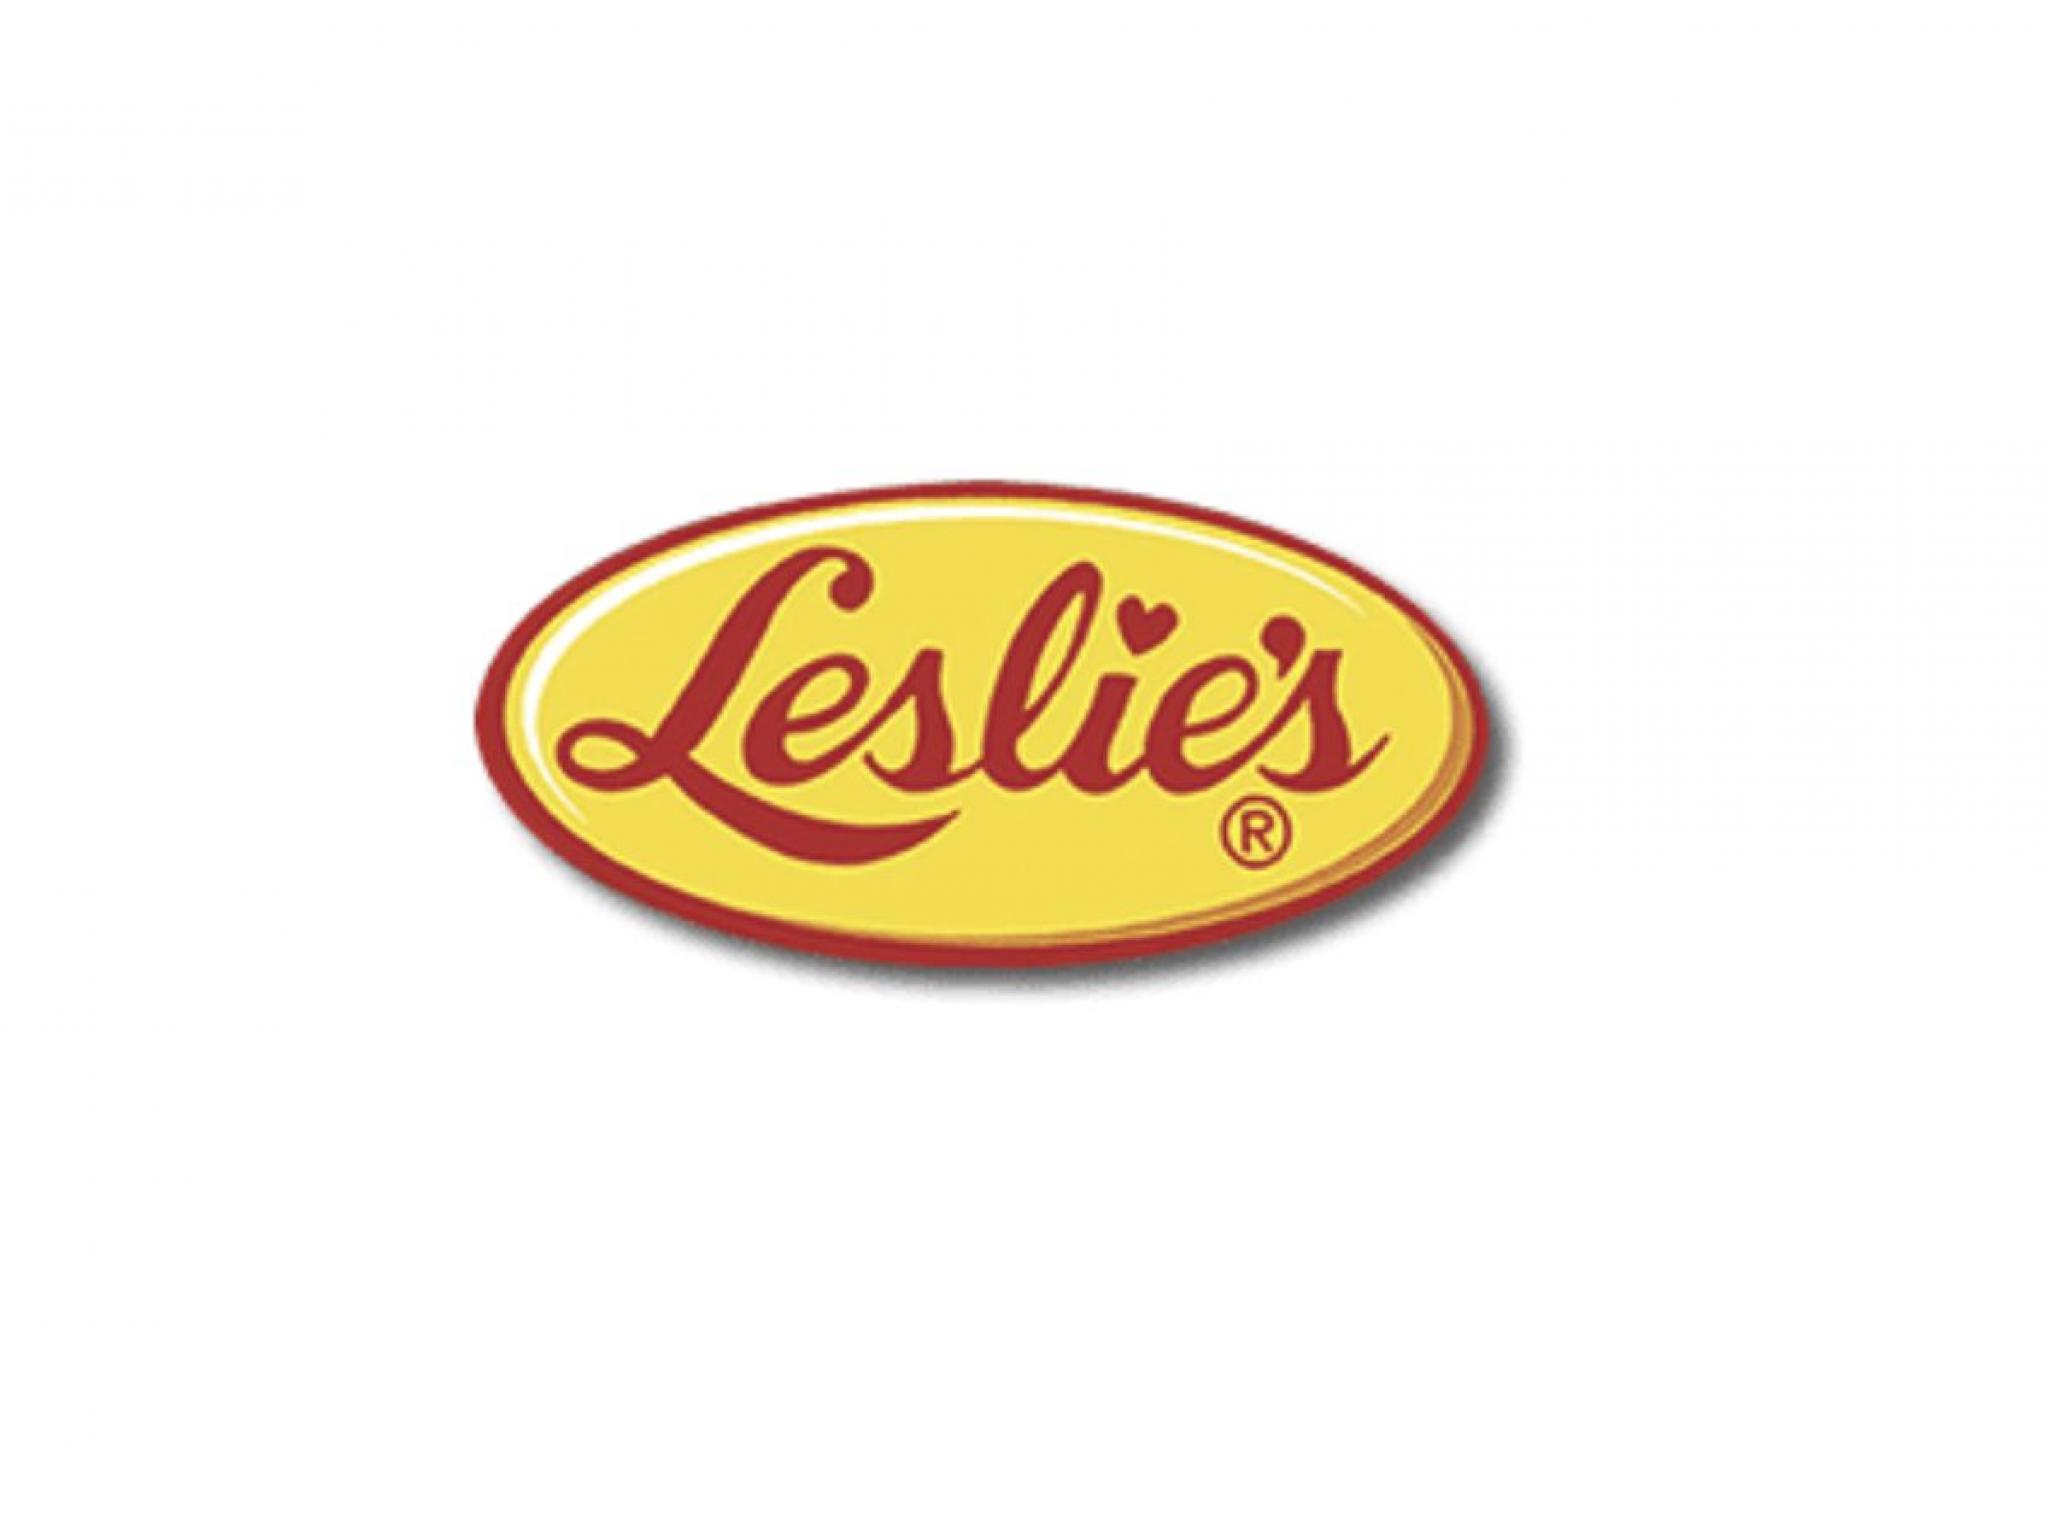  leslies-posts-weak-earnings-joins-las-vegas-sands-verve-therapeutics-and-other-big-stocks-moving-lower-in-wednesdays-pre-market-session 